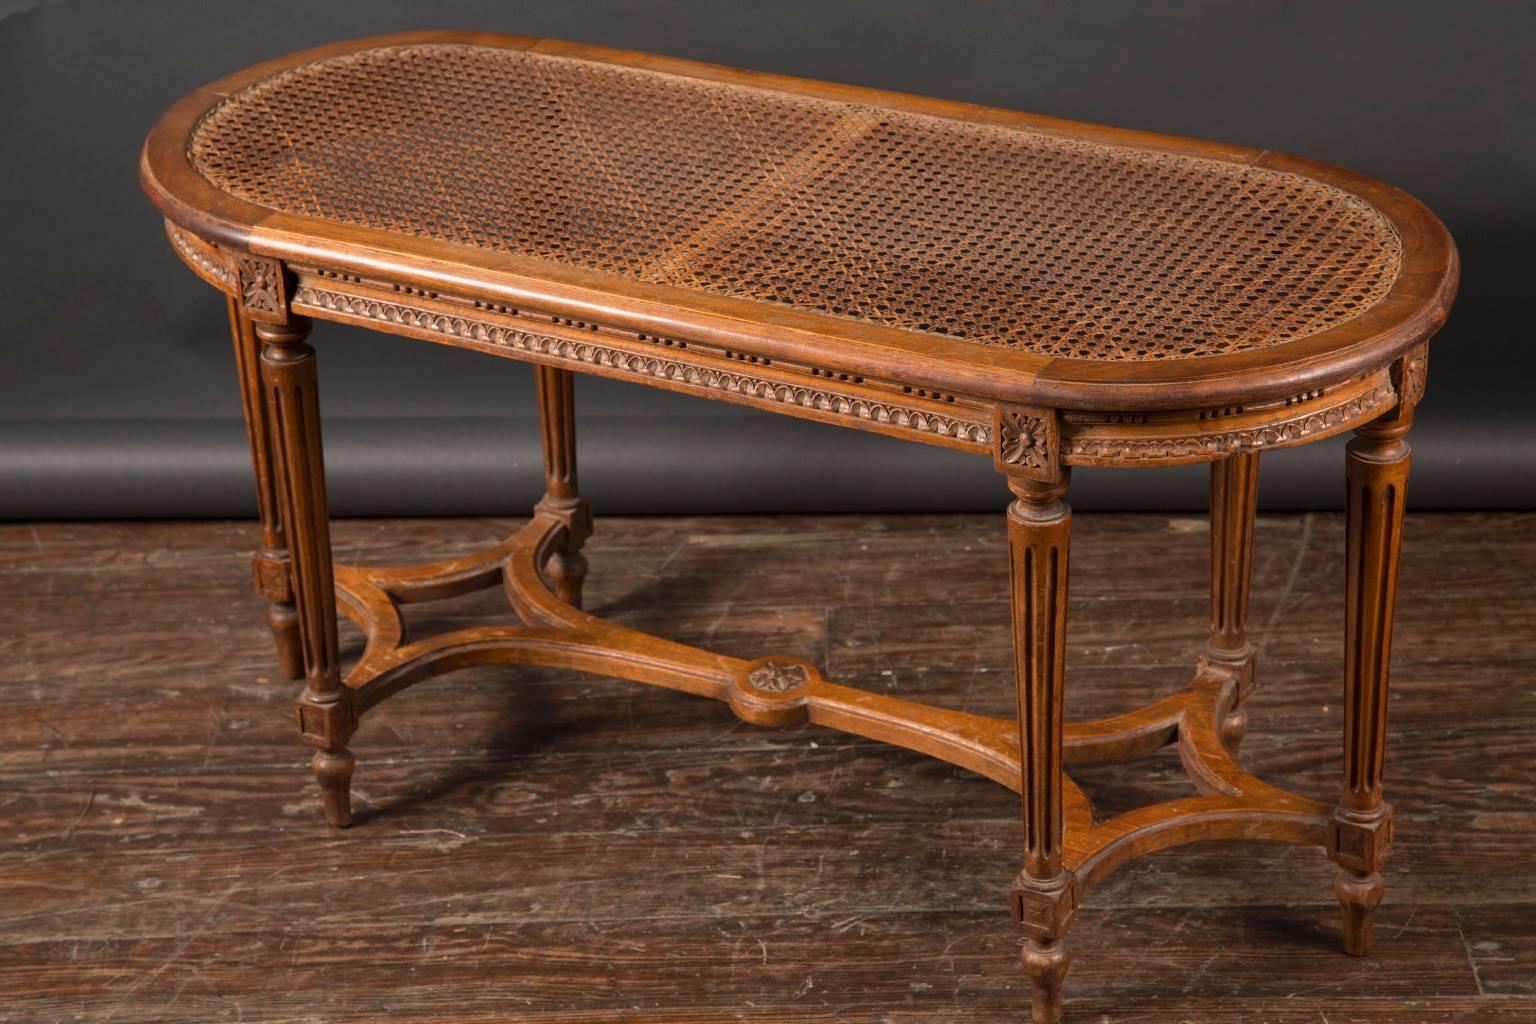 This beautiful Louis XVI bench is made of walnut and features a caned seat atop 6 fluted legs. The French antique piece dates back to the 19th century and offers small block marguerites both at the top and bottom of the fluted, tapered legs.